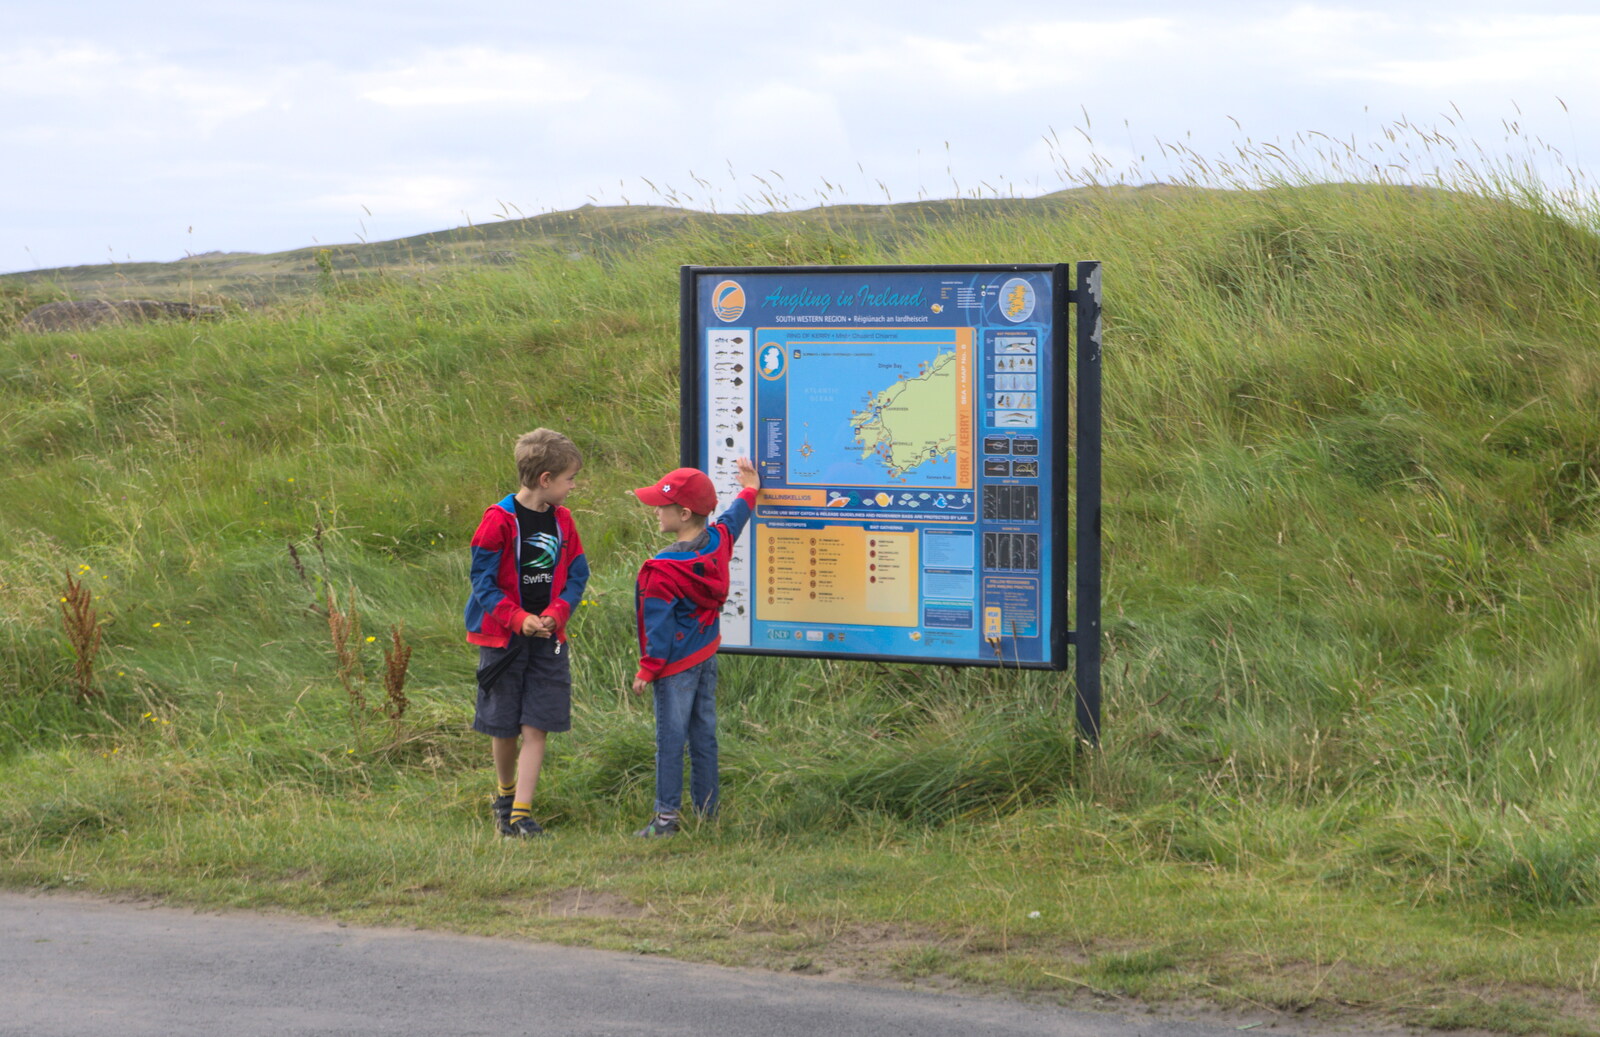 The boys look at a sign about fishing from Baile an Sceilg to An tSnaidhme, Co. Kerry, Ireland - 31st July 2017